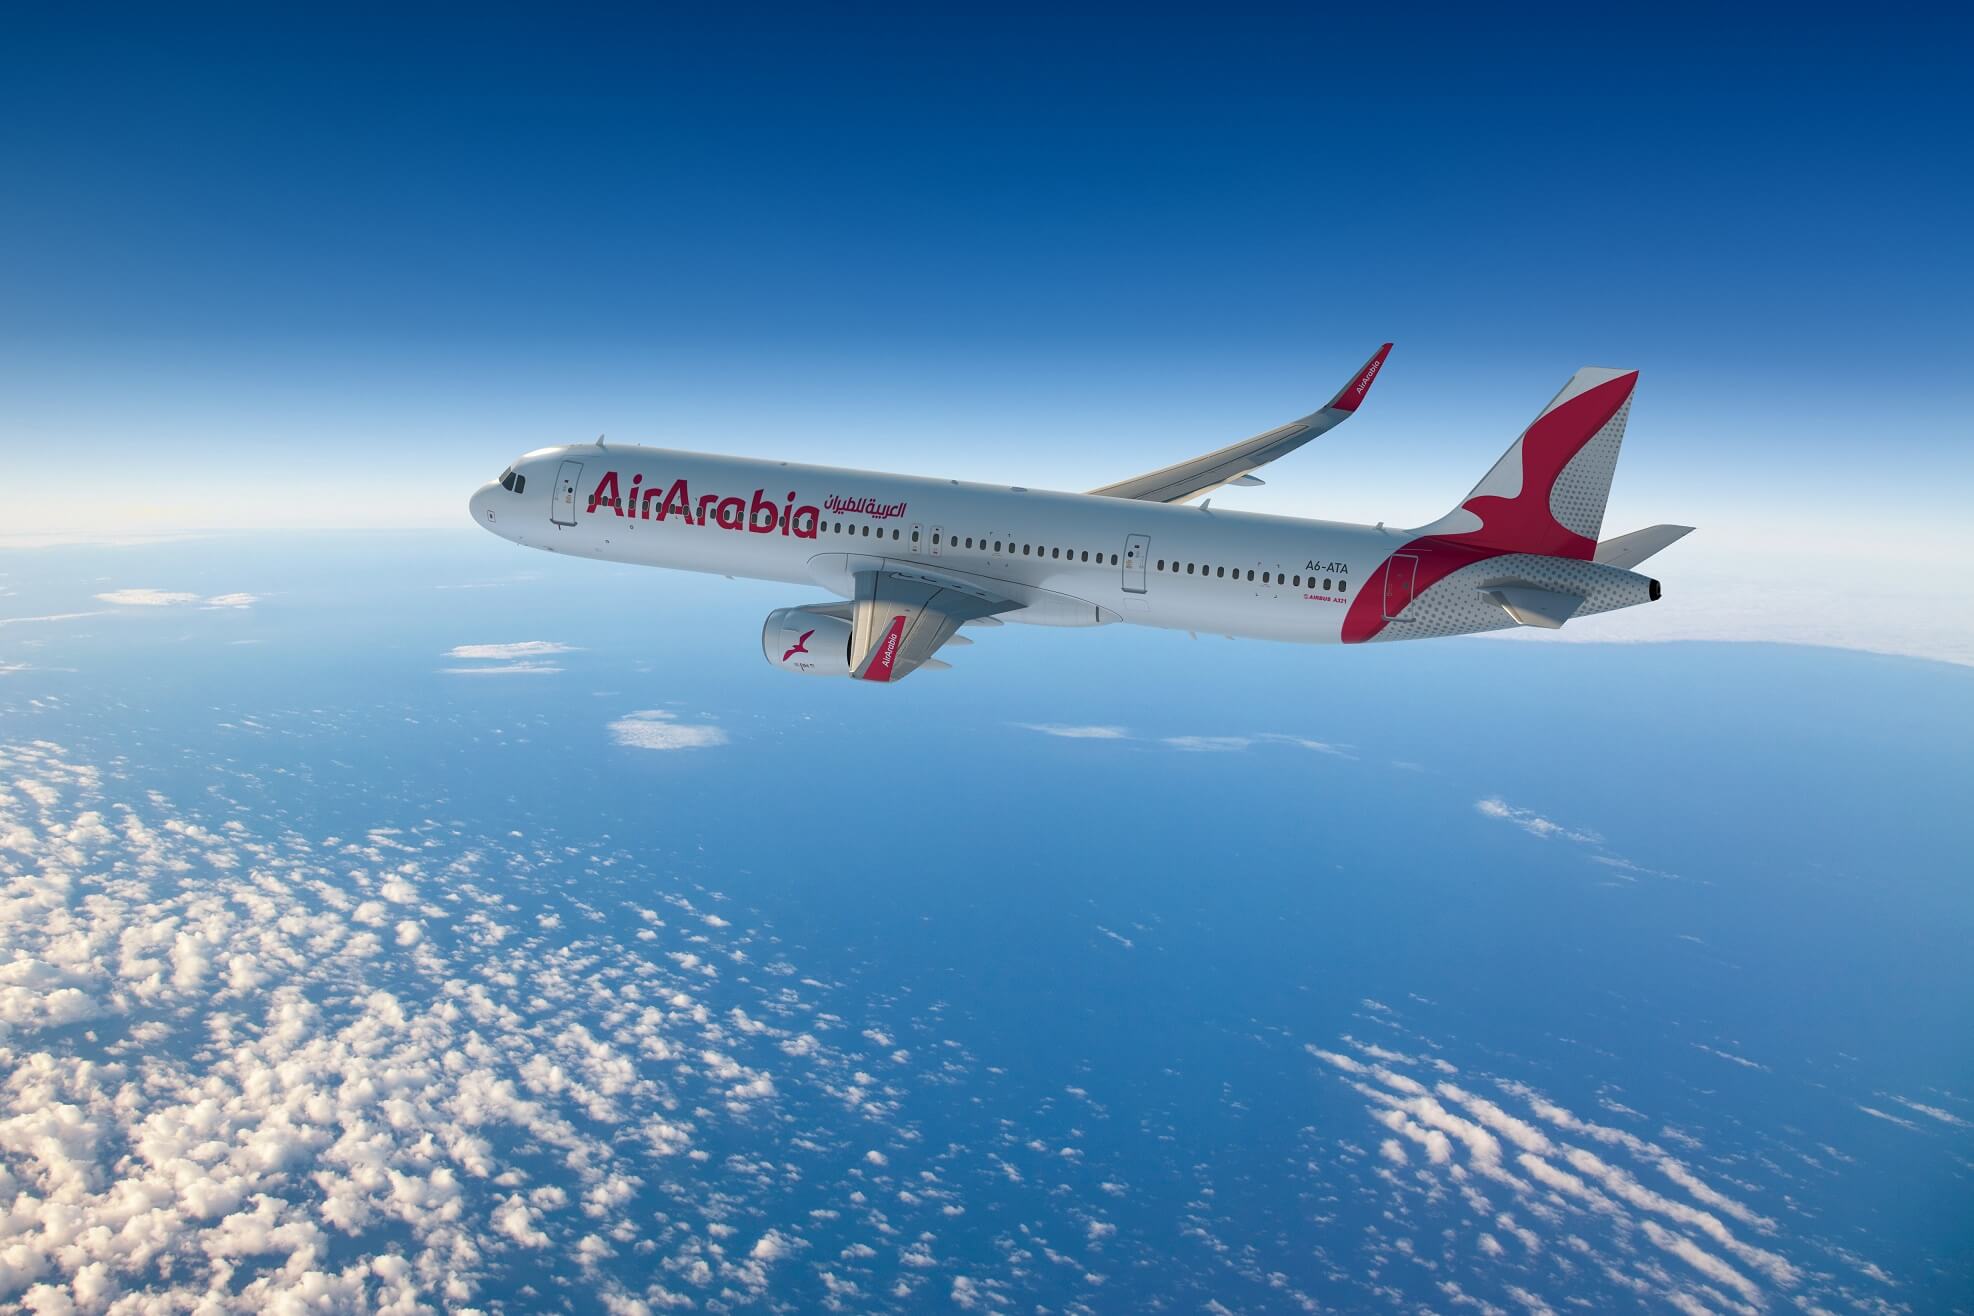 Air Arabia flying over the Gulf